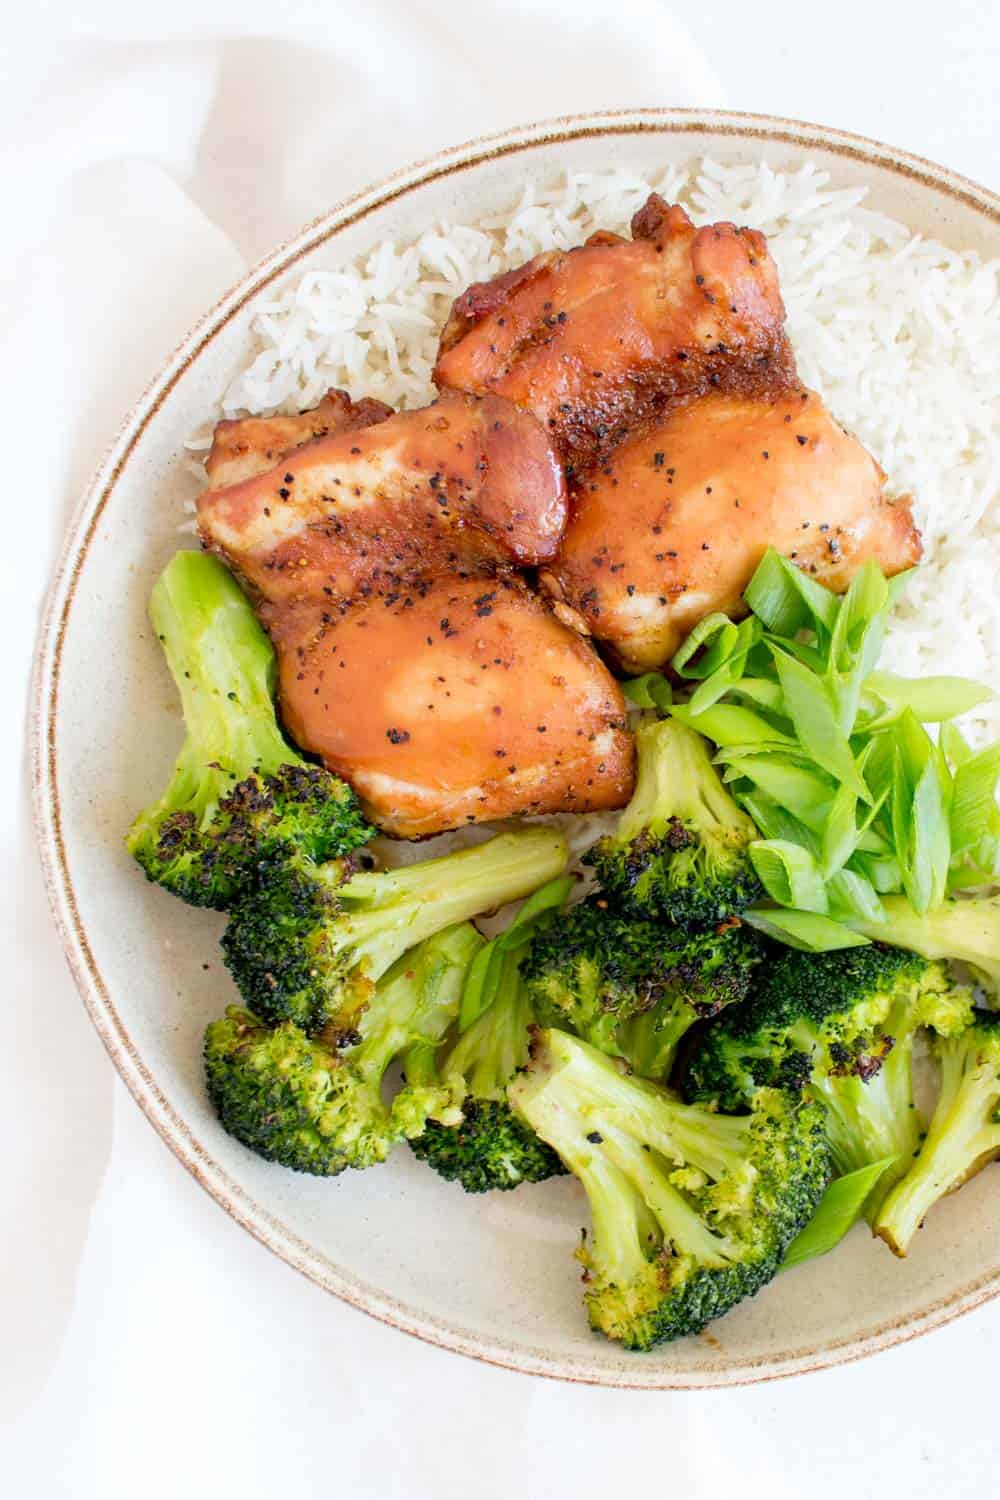 Sheet Pan Black Pepper Soy Chicken with Broccoli | by Carmy